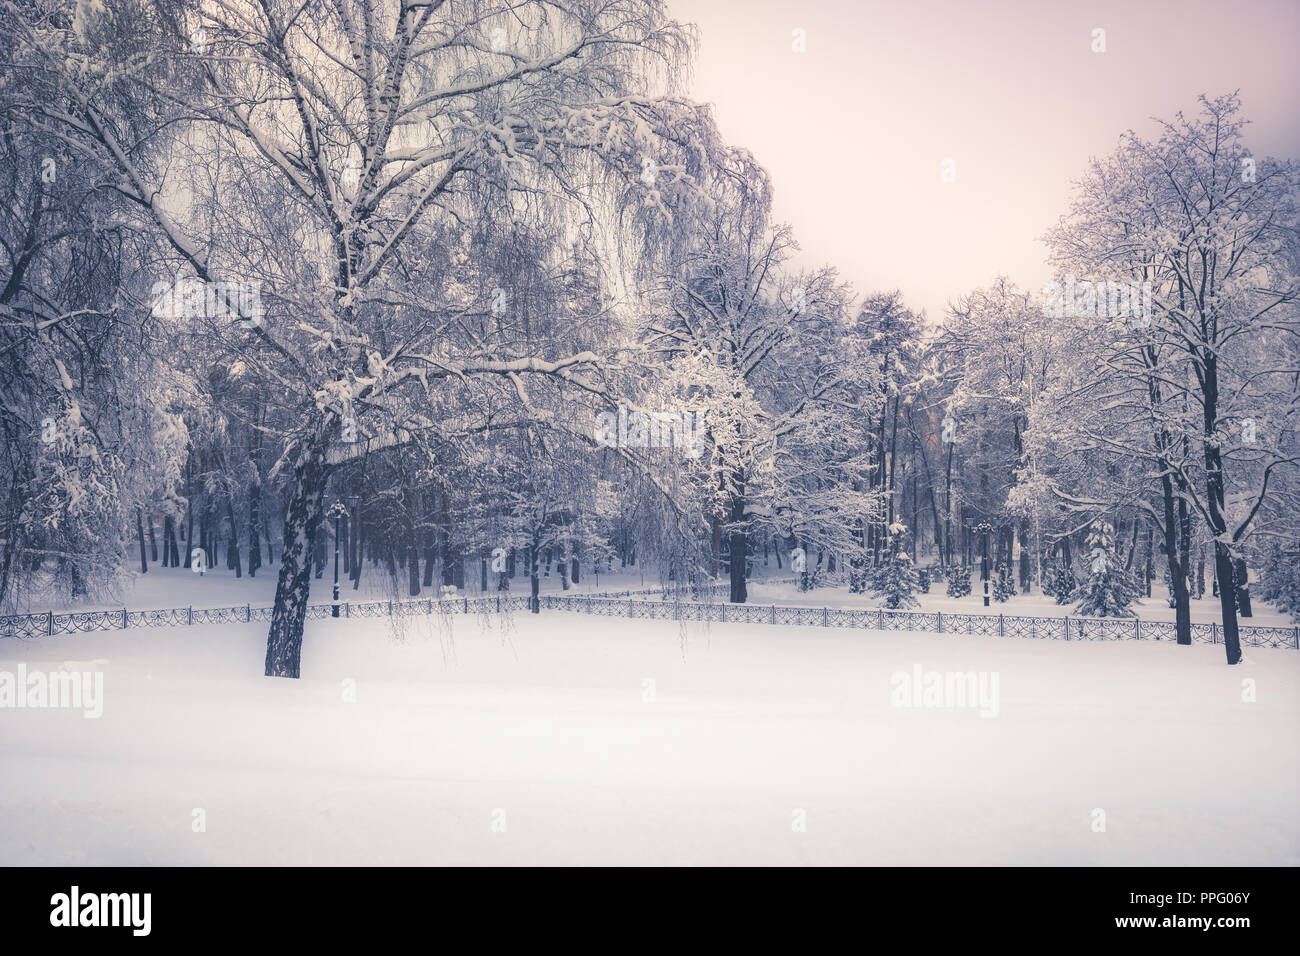 Winter snowy park landscape trees covered snow in soft blue purple colors Stock Photo